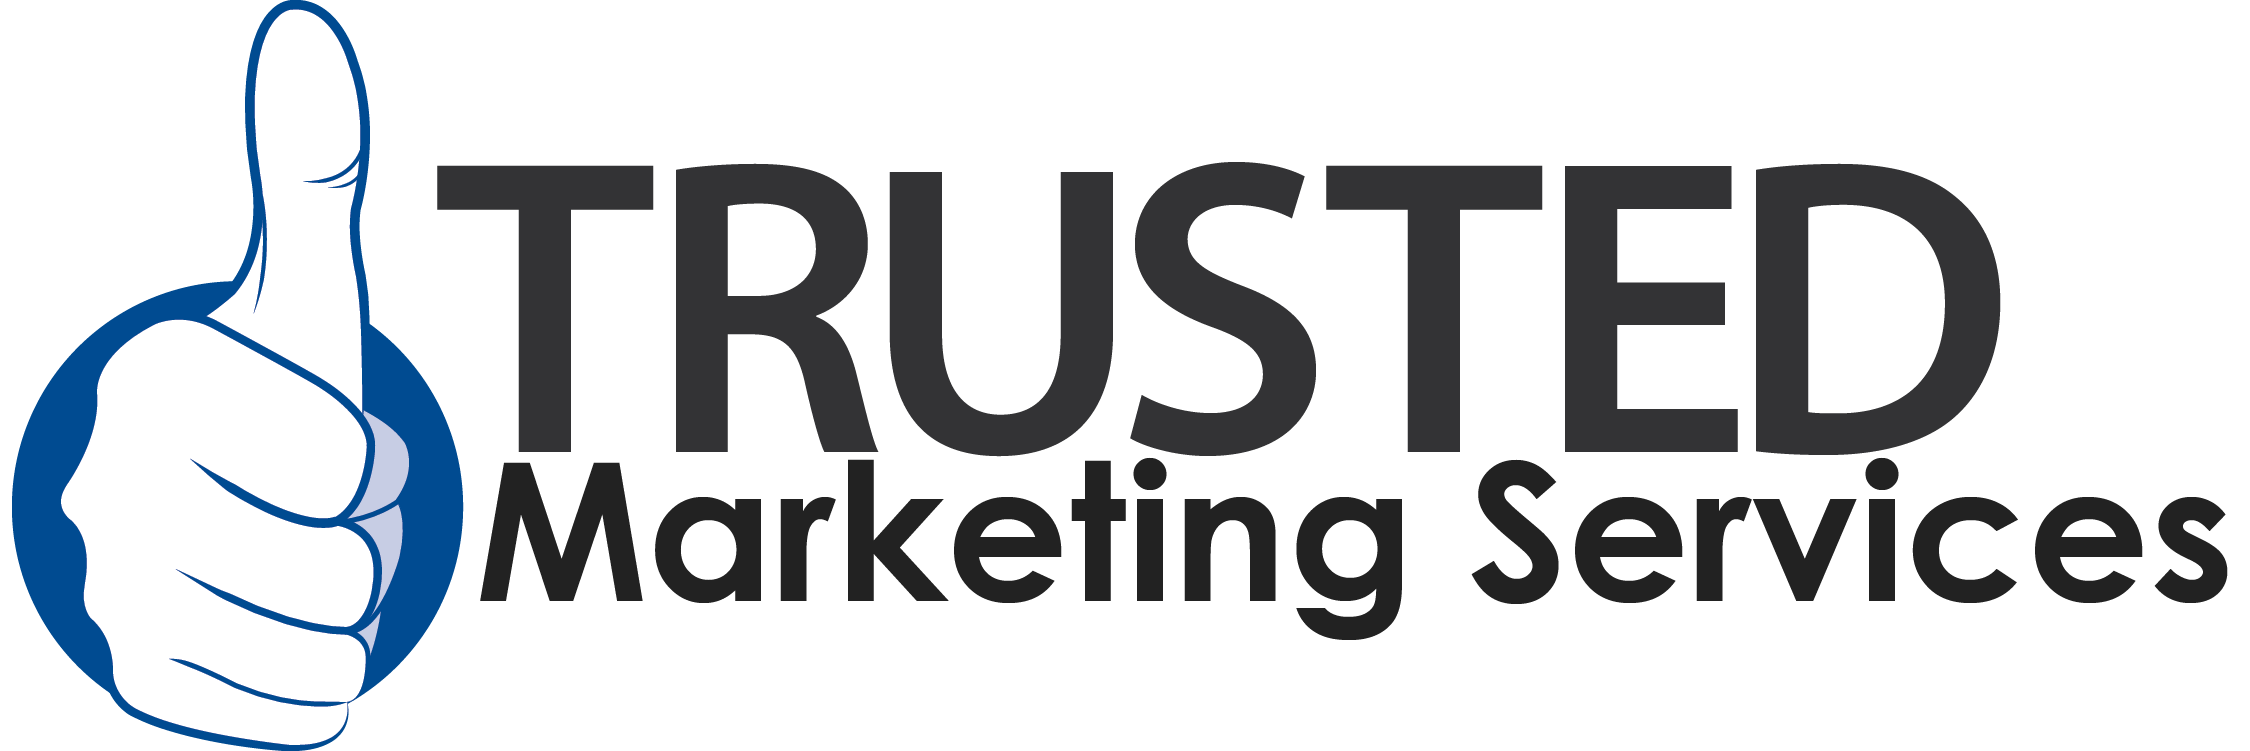 Marketing Service Logo - Trusted Marketing Services: Get Additional Information About Trusted